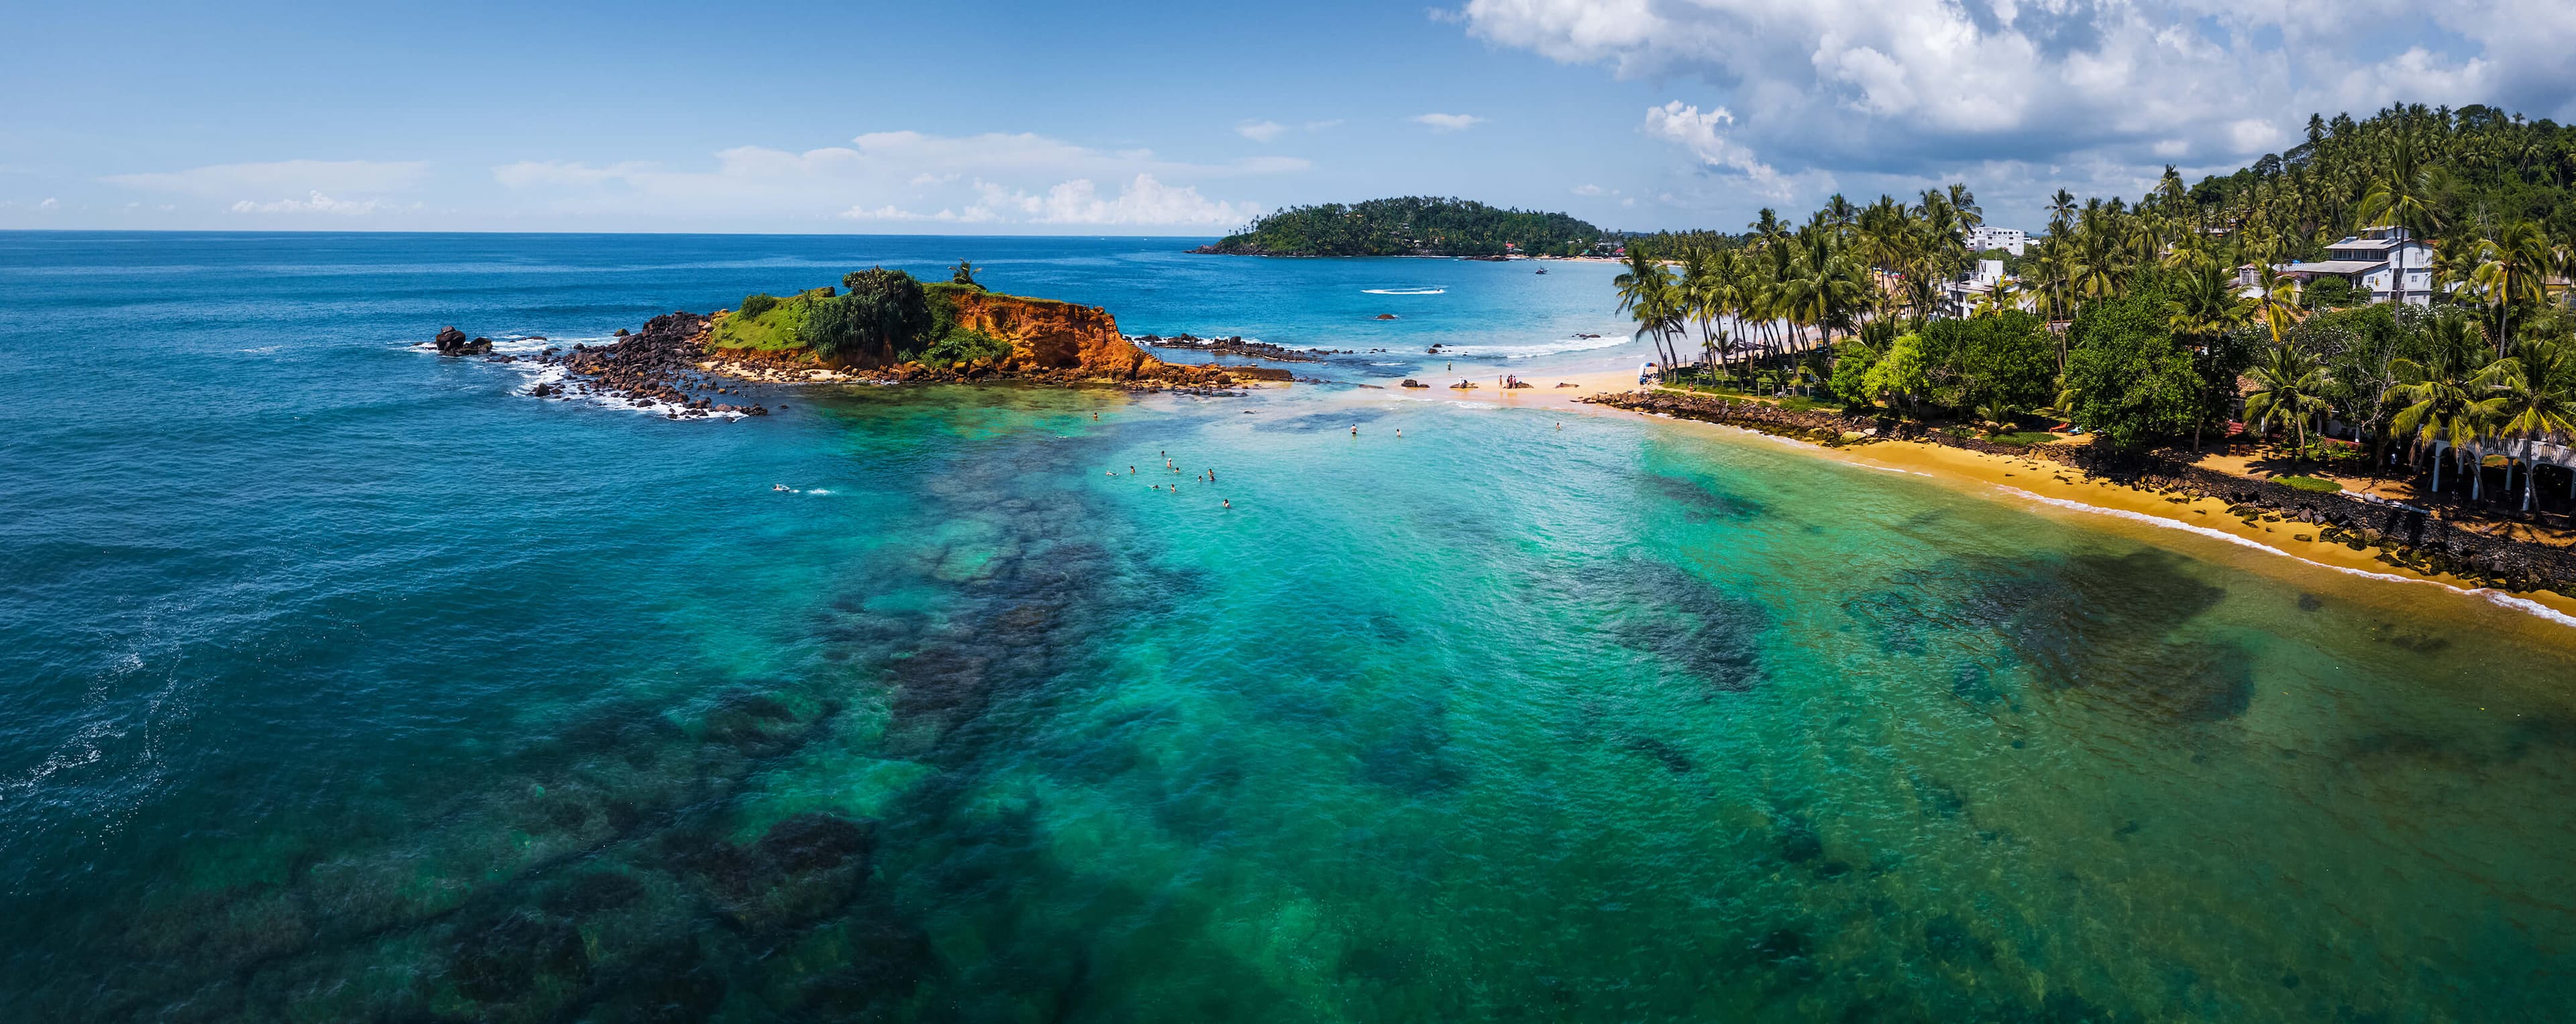 Aerial panorama of the tropical beach and clear sea with coral reefs in the town of Mirissa, Sri Lanka.